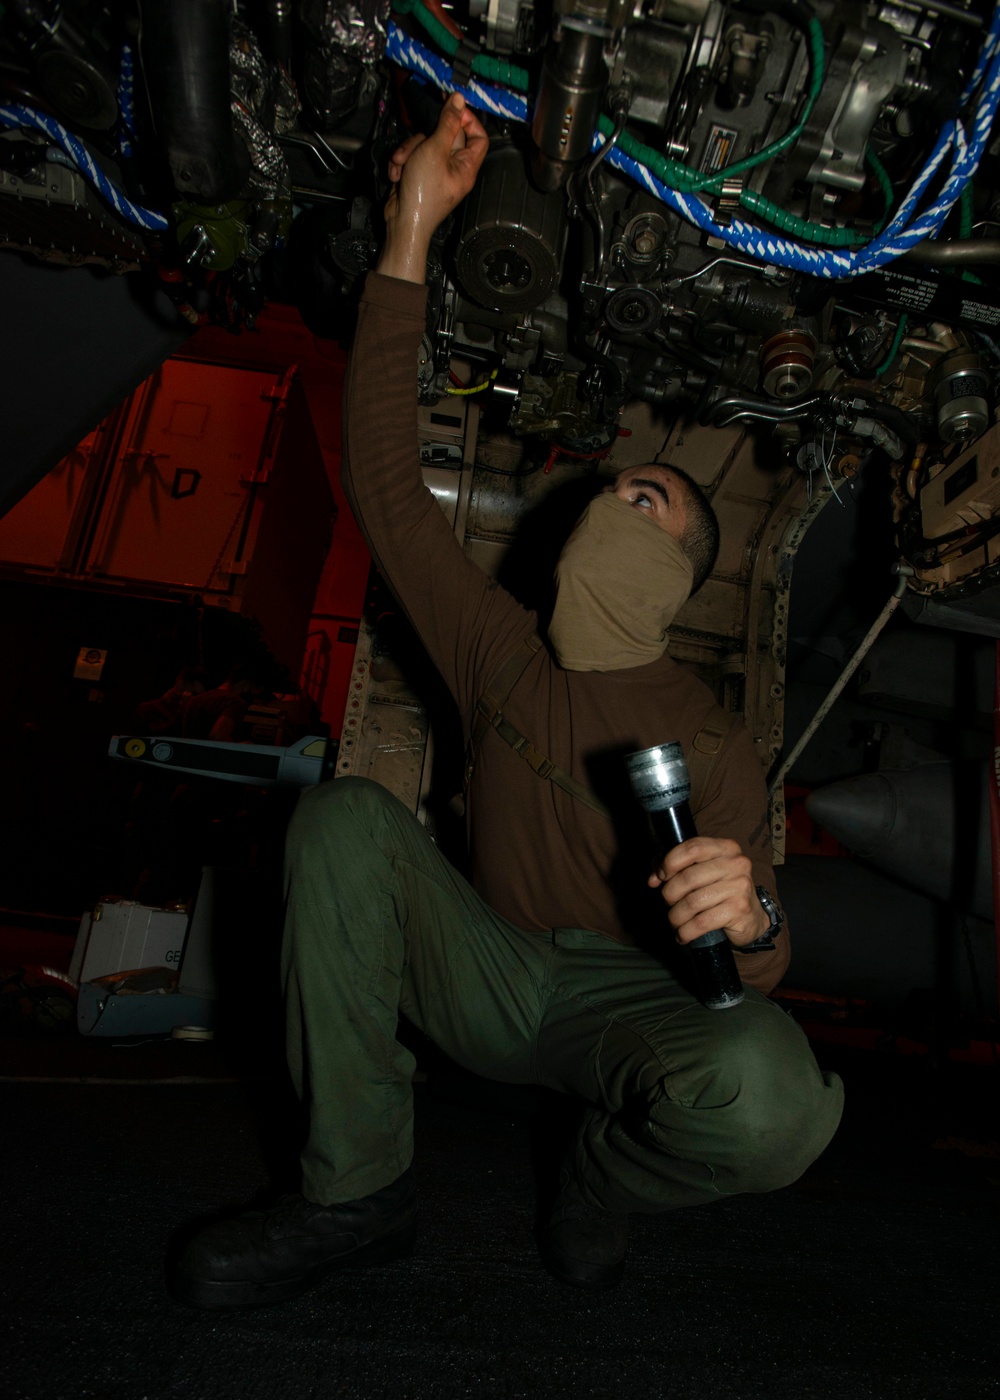 Lance Corporal Verifies Security Of Cable On E/A-18C Hornet, from the &quot;Death Rattlers&quot; of Marine Fighter Attack Squadron (VMFA) 323, In Hangar Bay Aboard Aircraft Carrier USS Nimitz CVN 68